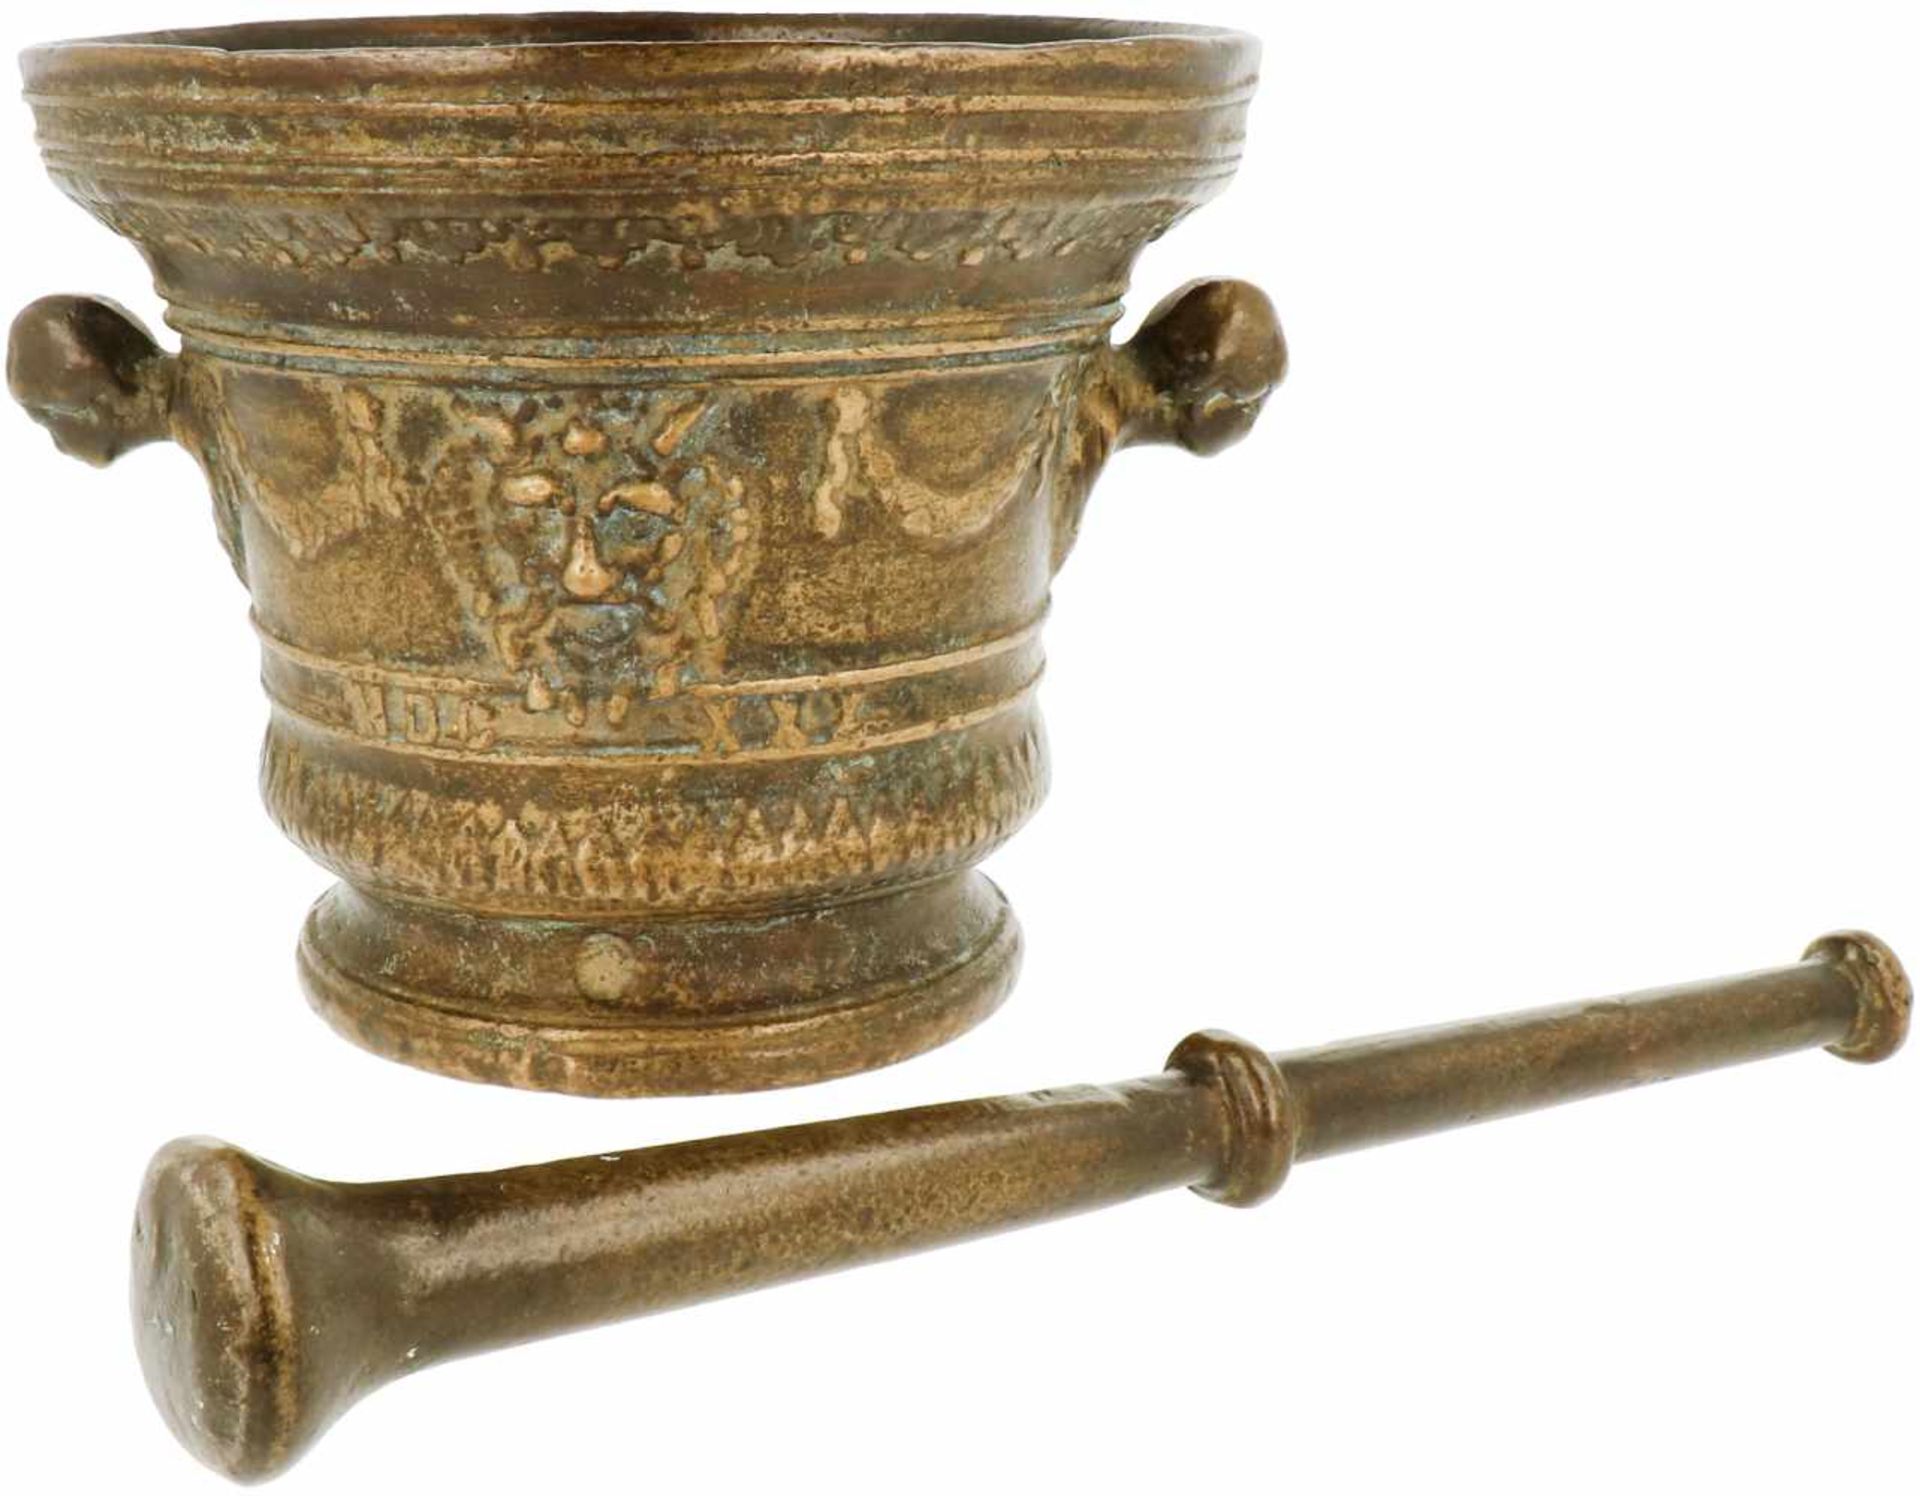 An impressive bronze mortar decorated with ornamental heads. With pestle. 19th century. - Bild 2 aus 2